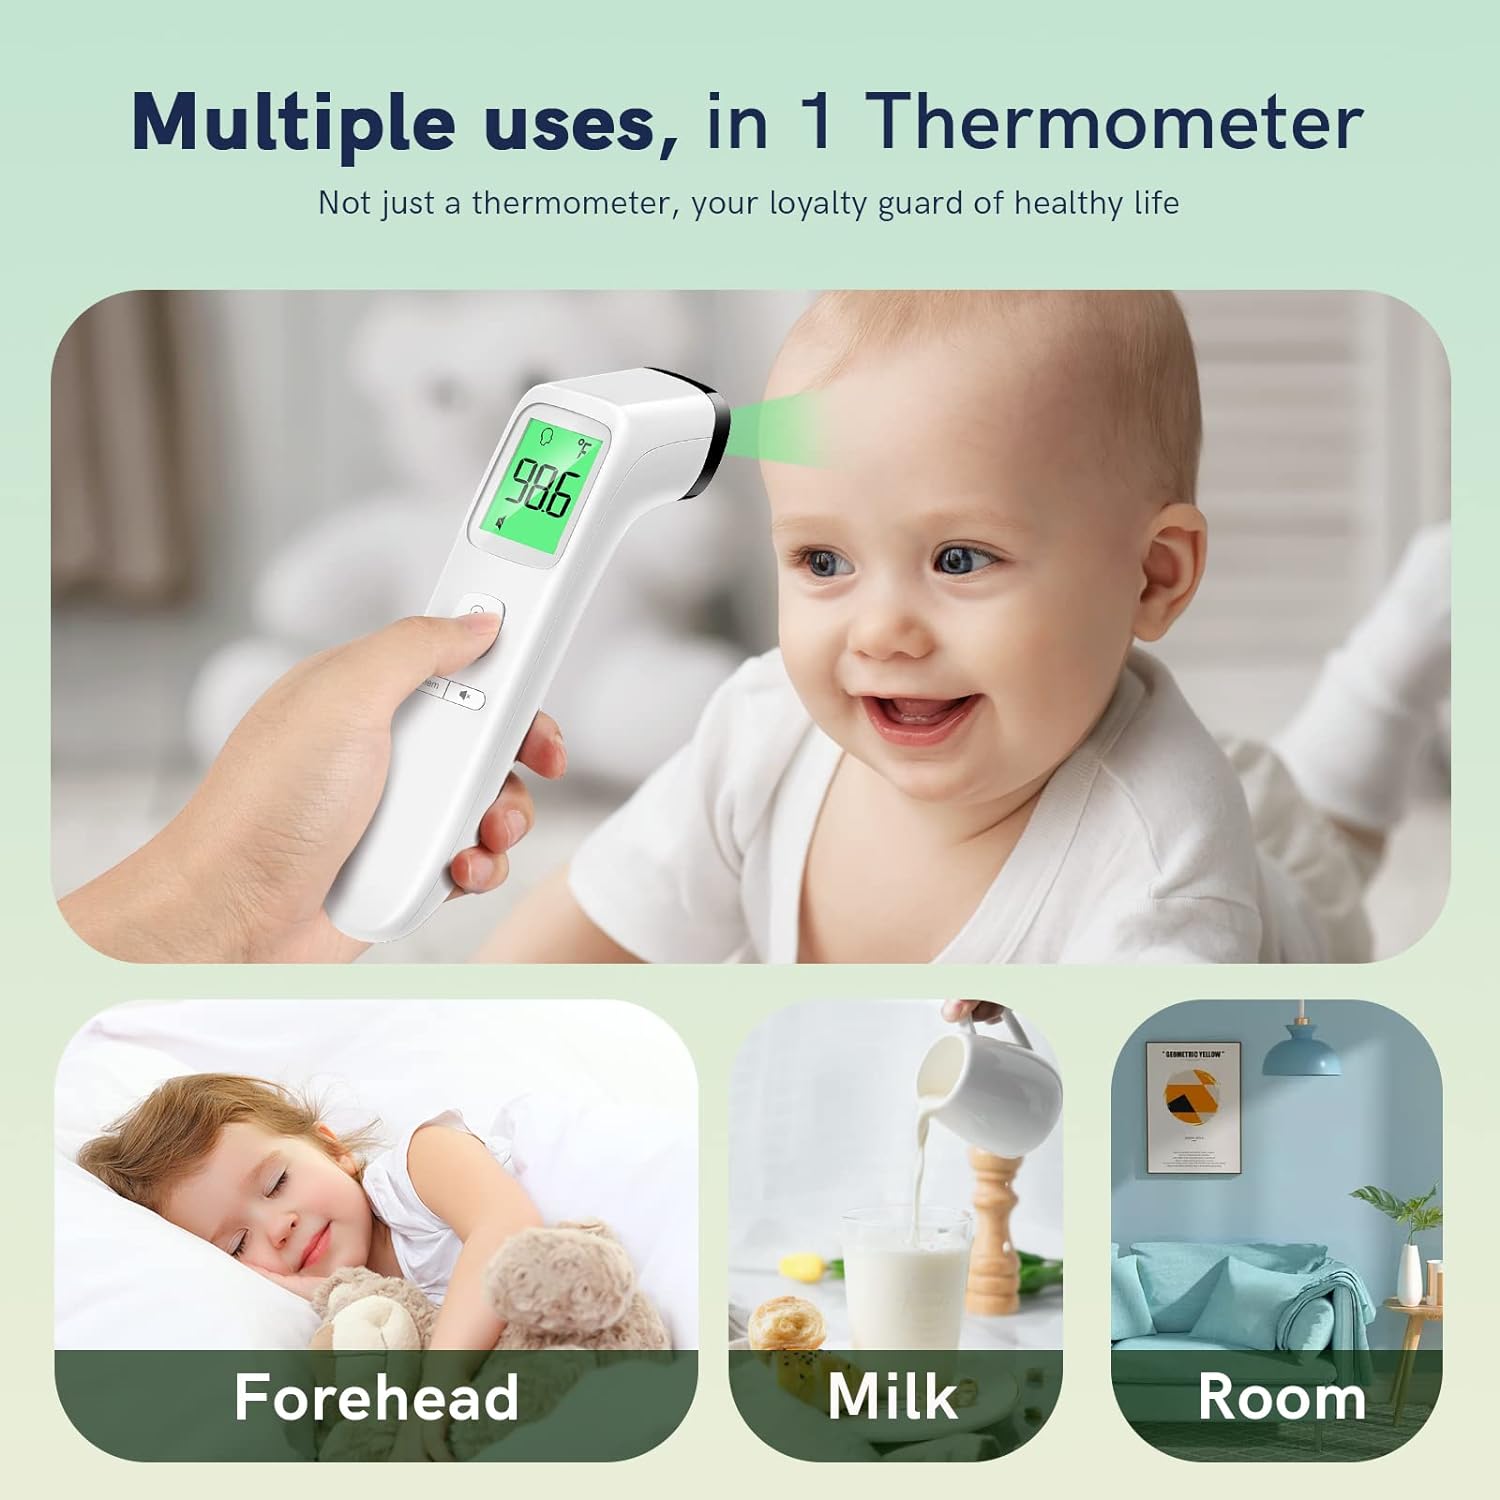 No-Touch Thermometer for Adults and Kids, Fast Accurate Digital Thermometer with Fever Alarm & Silent Mode, Easy-to-use, Forehead & Ear Thermometer for Babies, Kids & Elderly : Baby